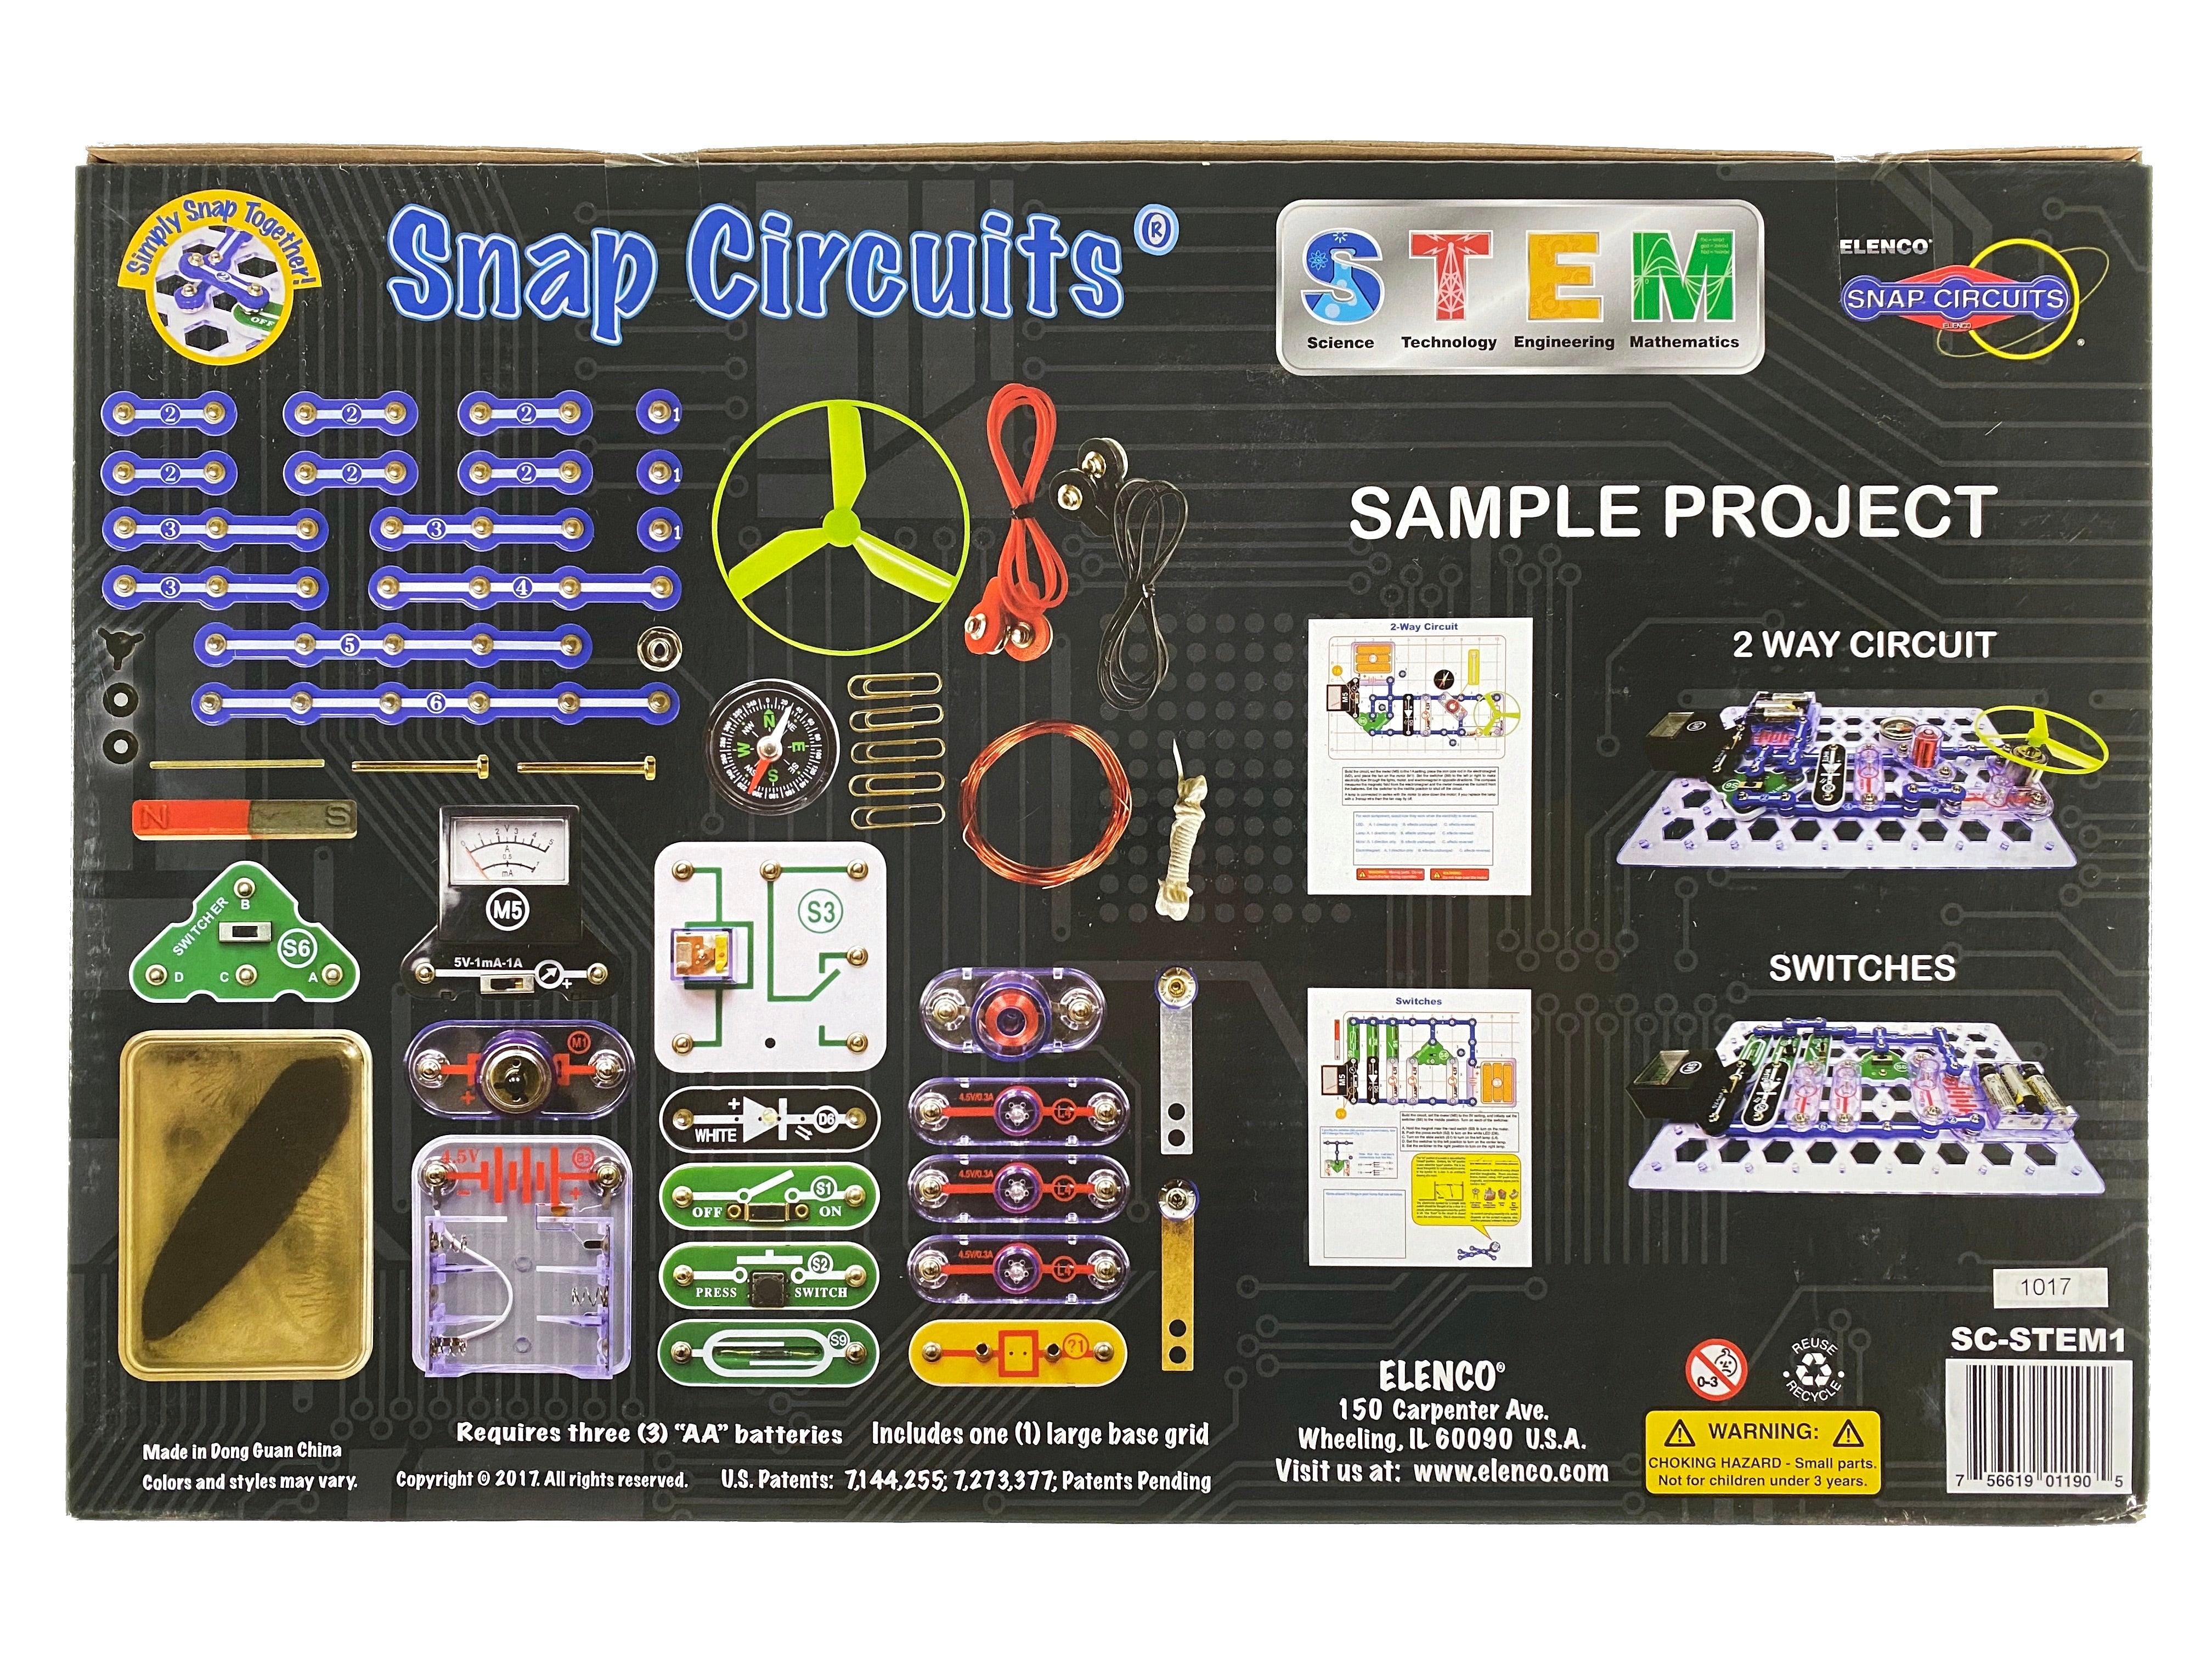 Snap Circuits Snaptricity Kit for Electronics Exploration